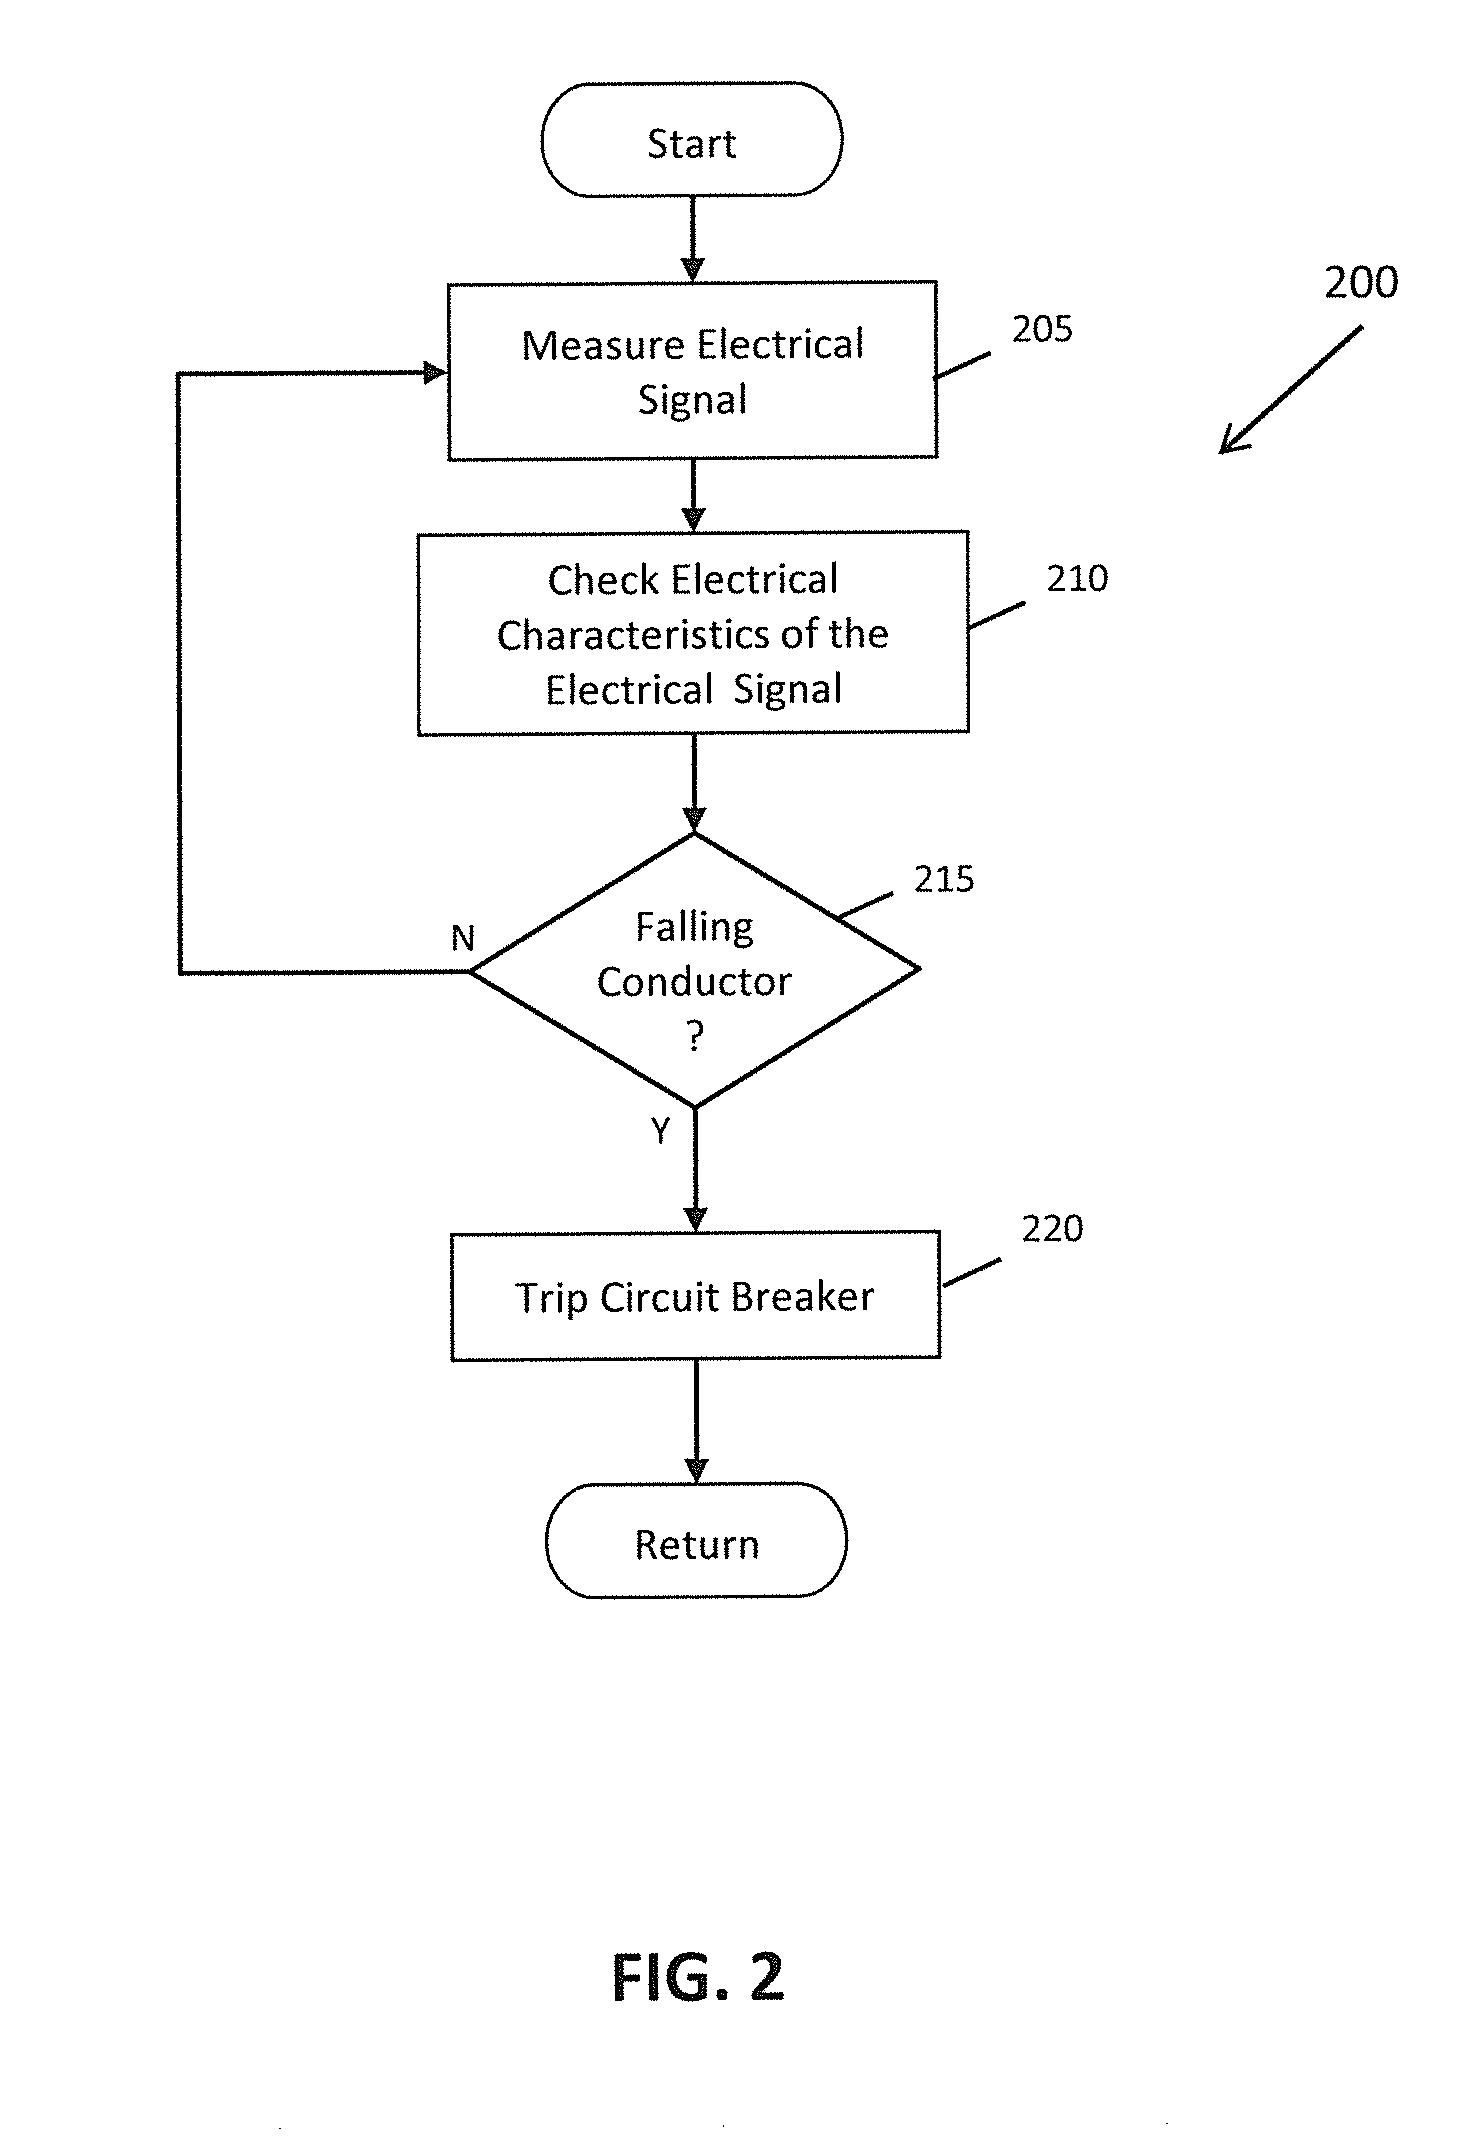 System for detecting a falling electric power conductor and related methods